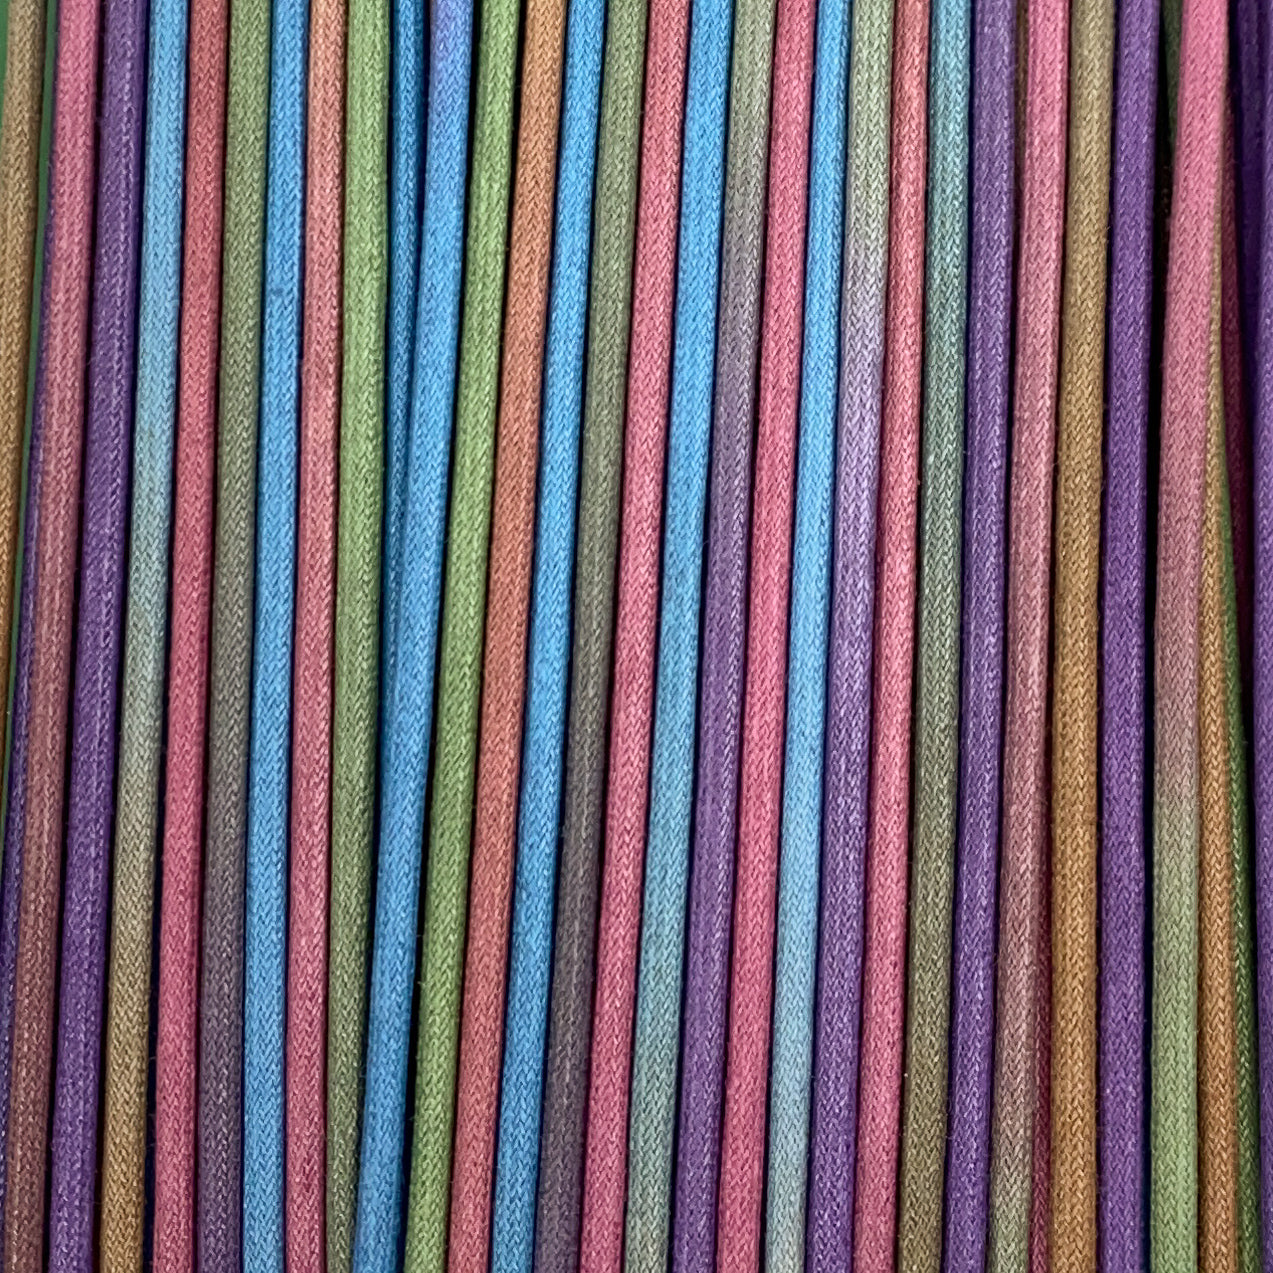 3mm Variegated Waxed Cotton - 3 yds.